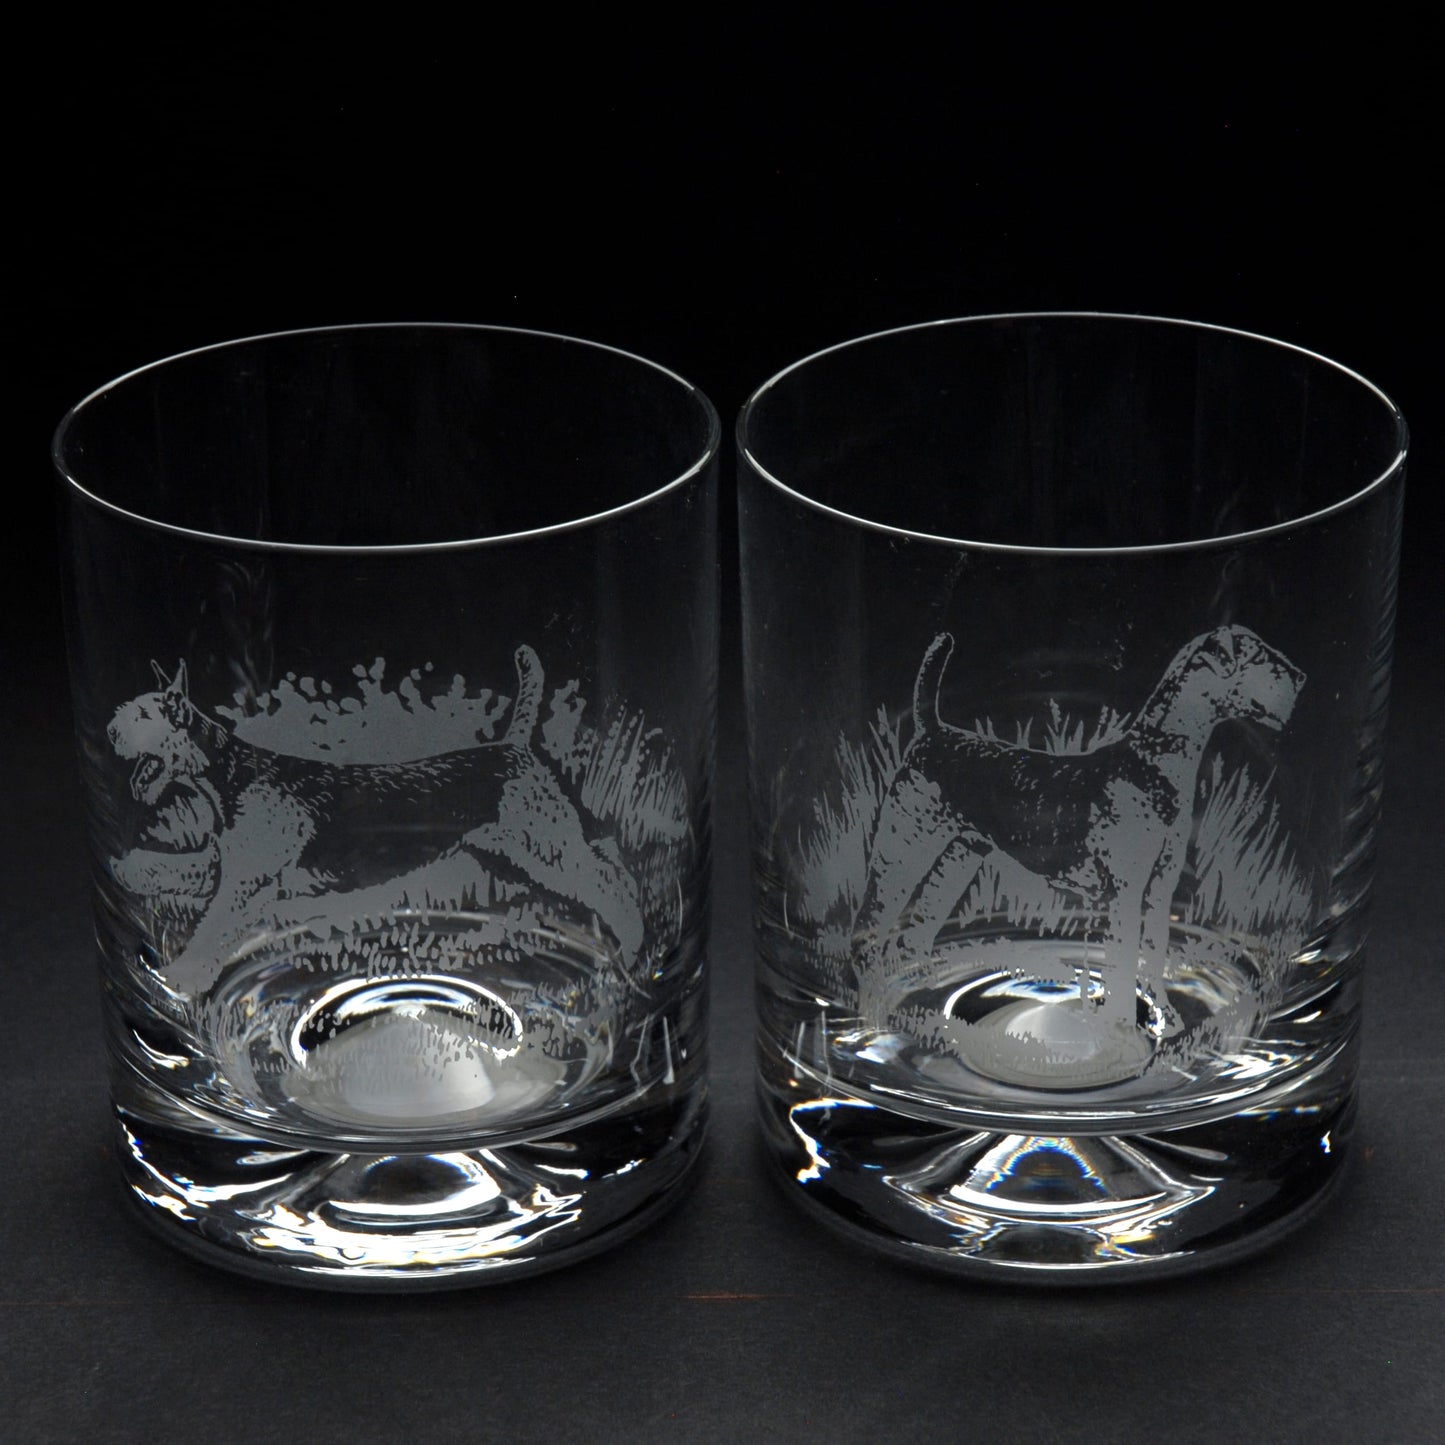 Airedale Terrier Dog Whiskey Tumbler Glass - Hand Etched/Engraved Gift